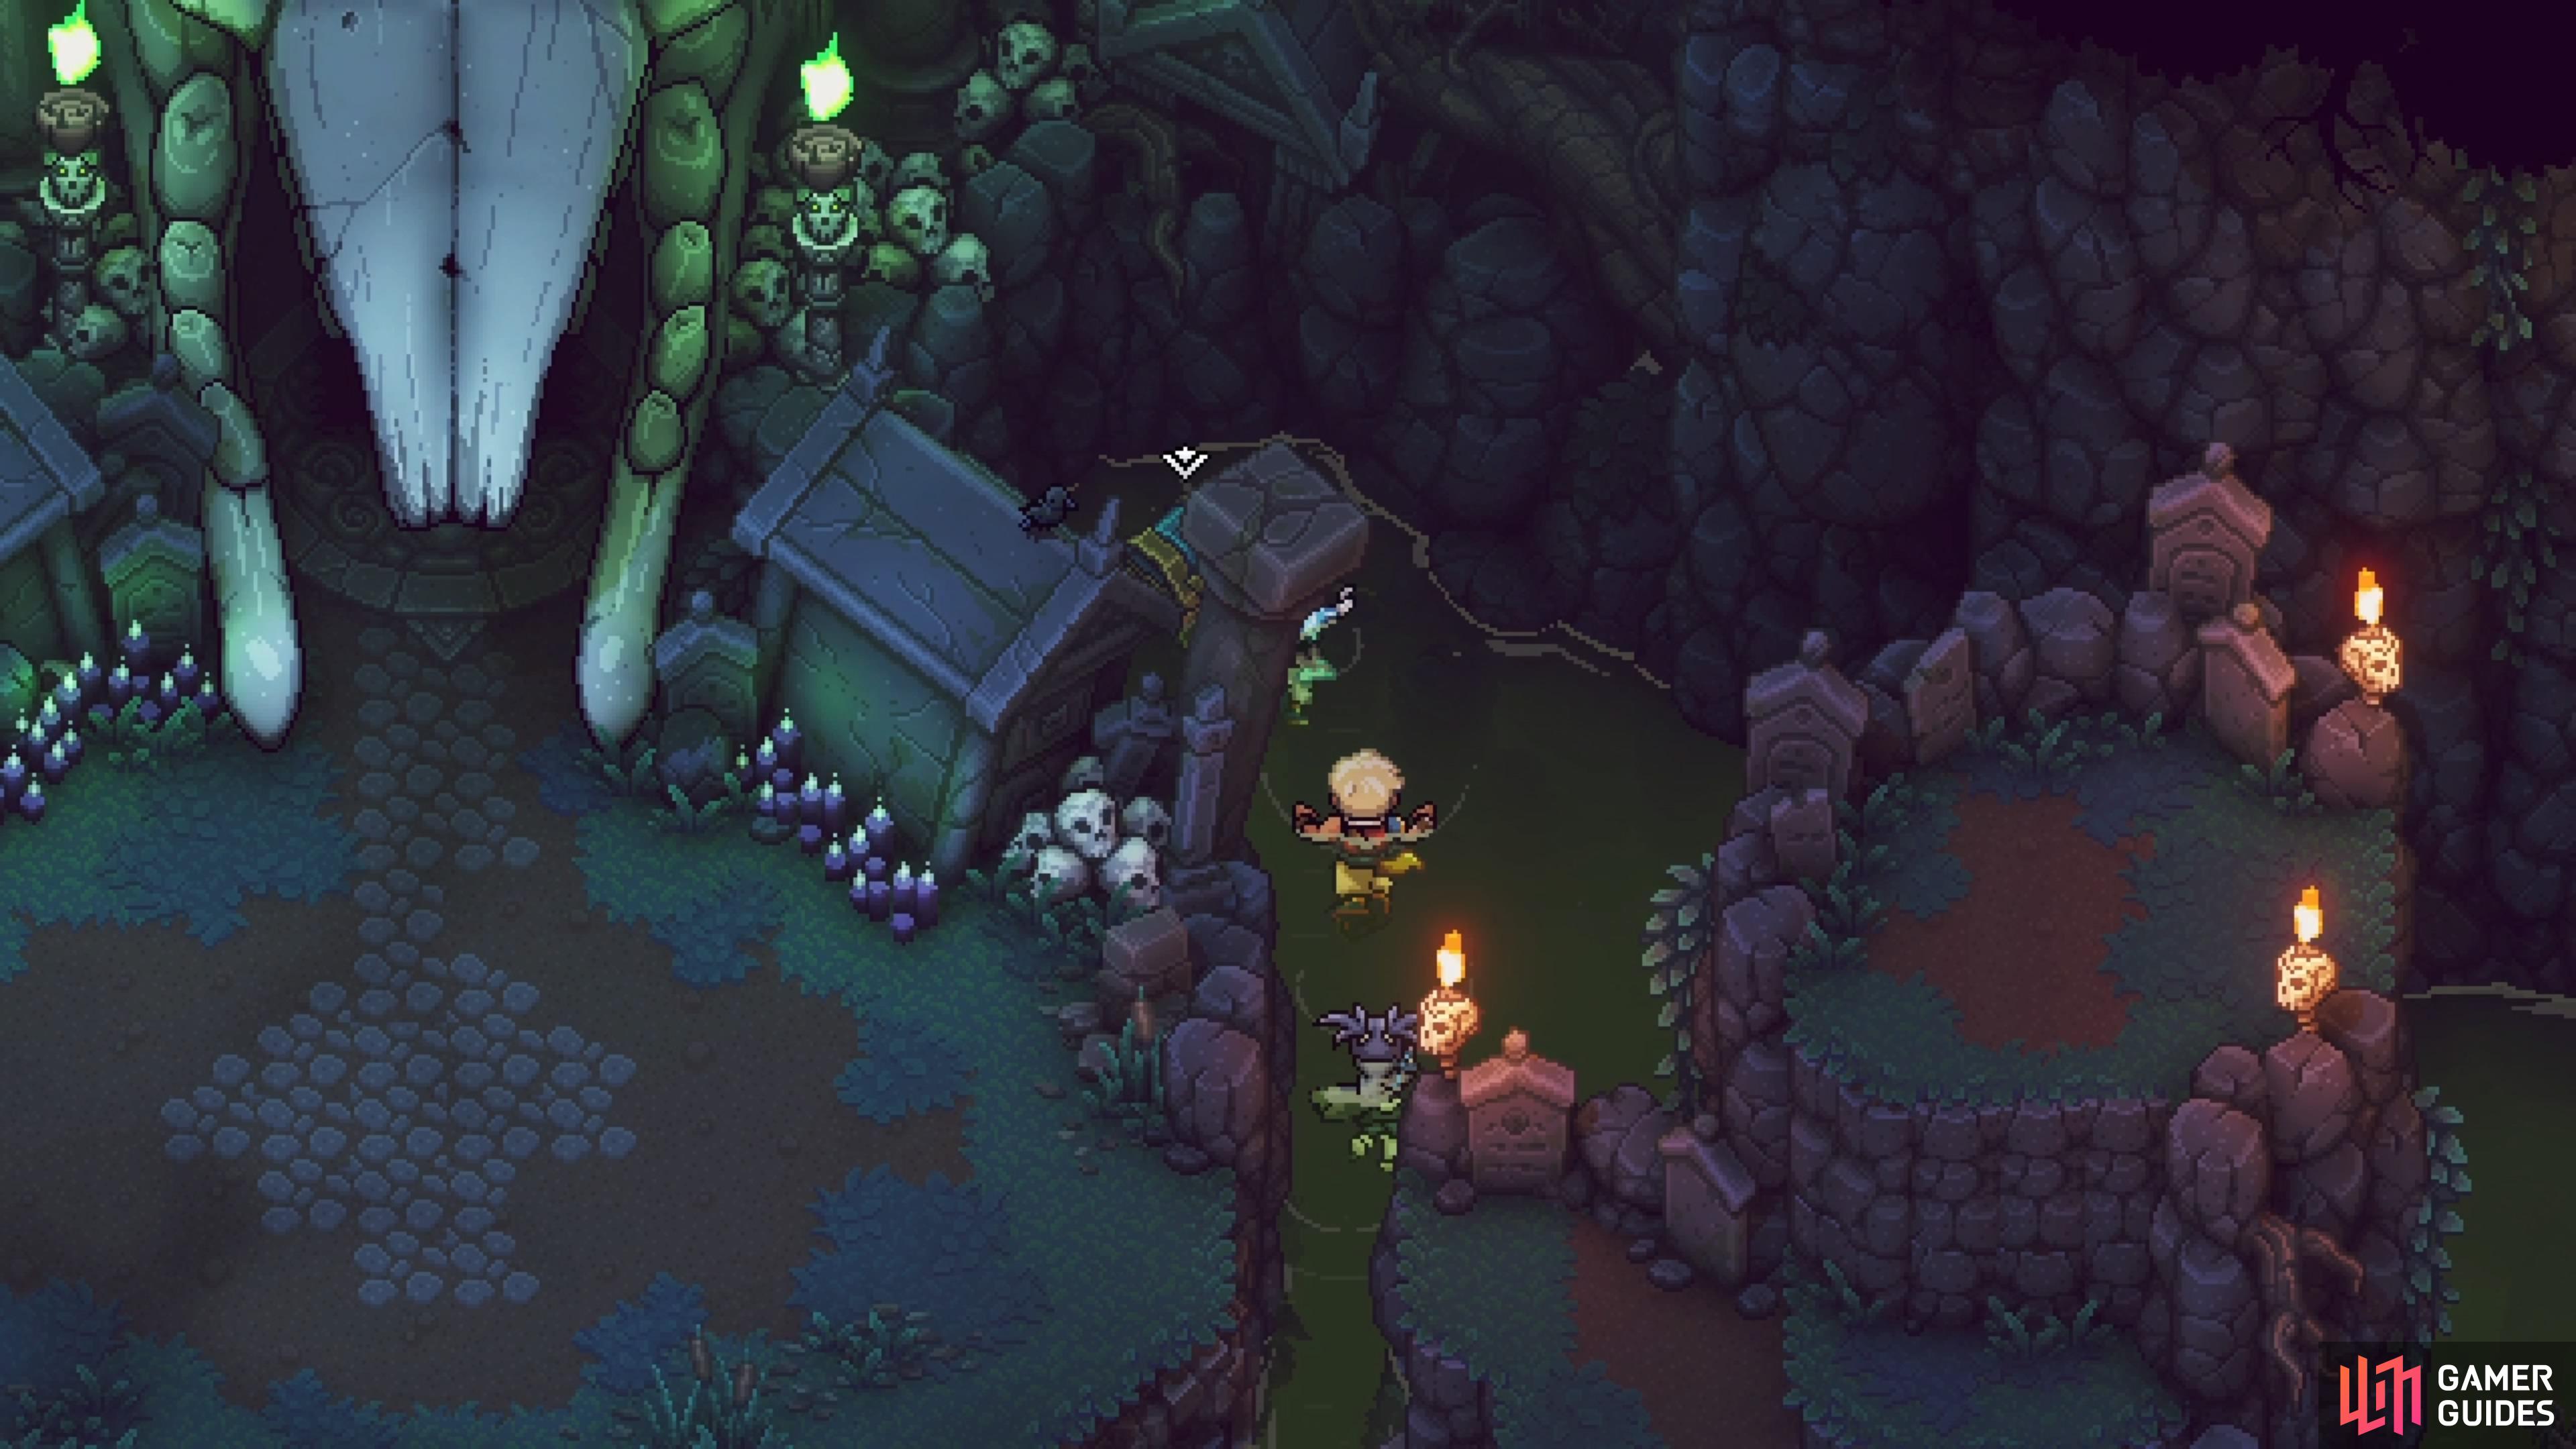 In the corner right here, by the entrance to Necromancer’s Lair, will be a chest with a Rainbow Conch.